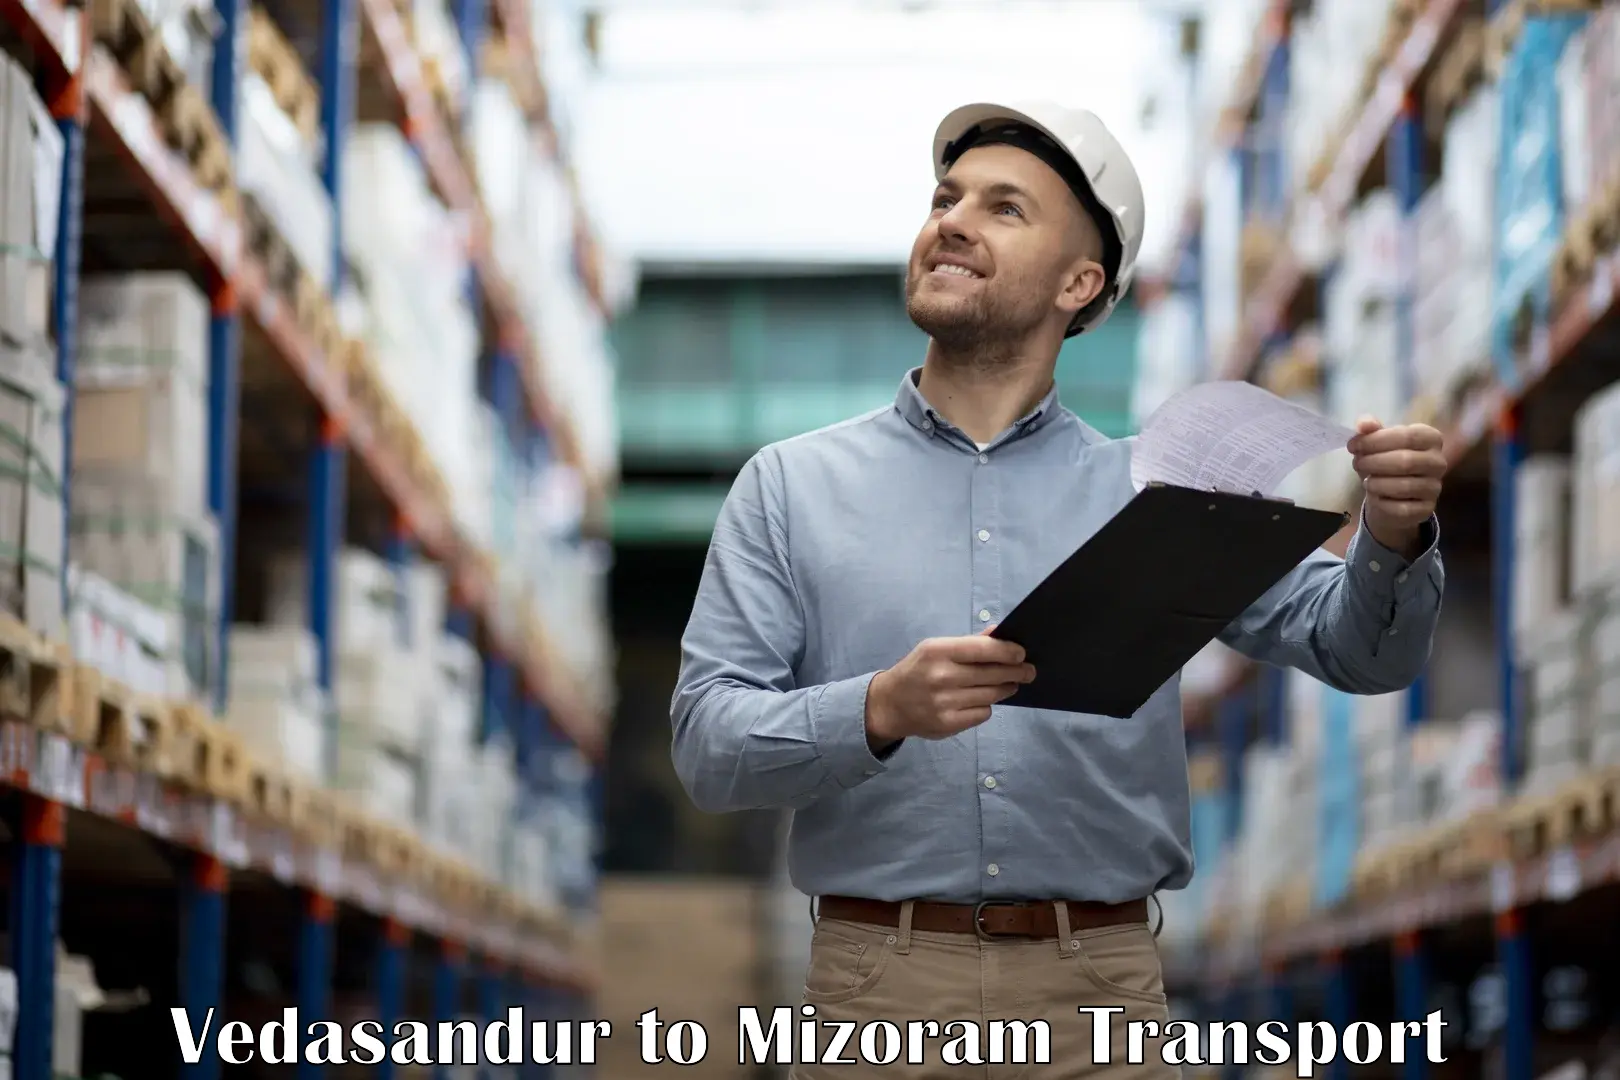 Commercial transport service Vedasandur to Aizawl